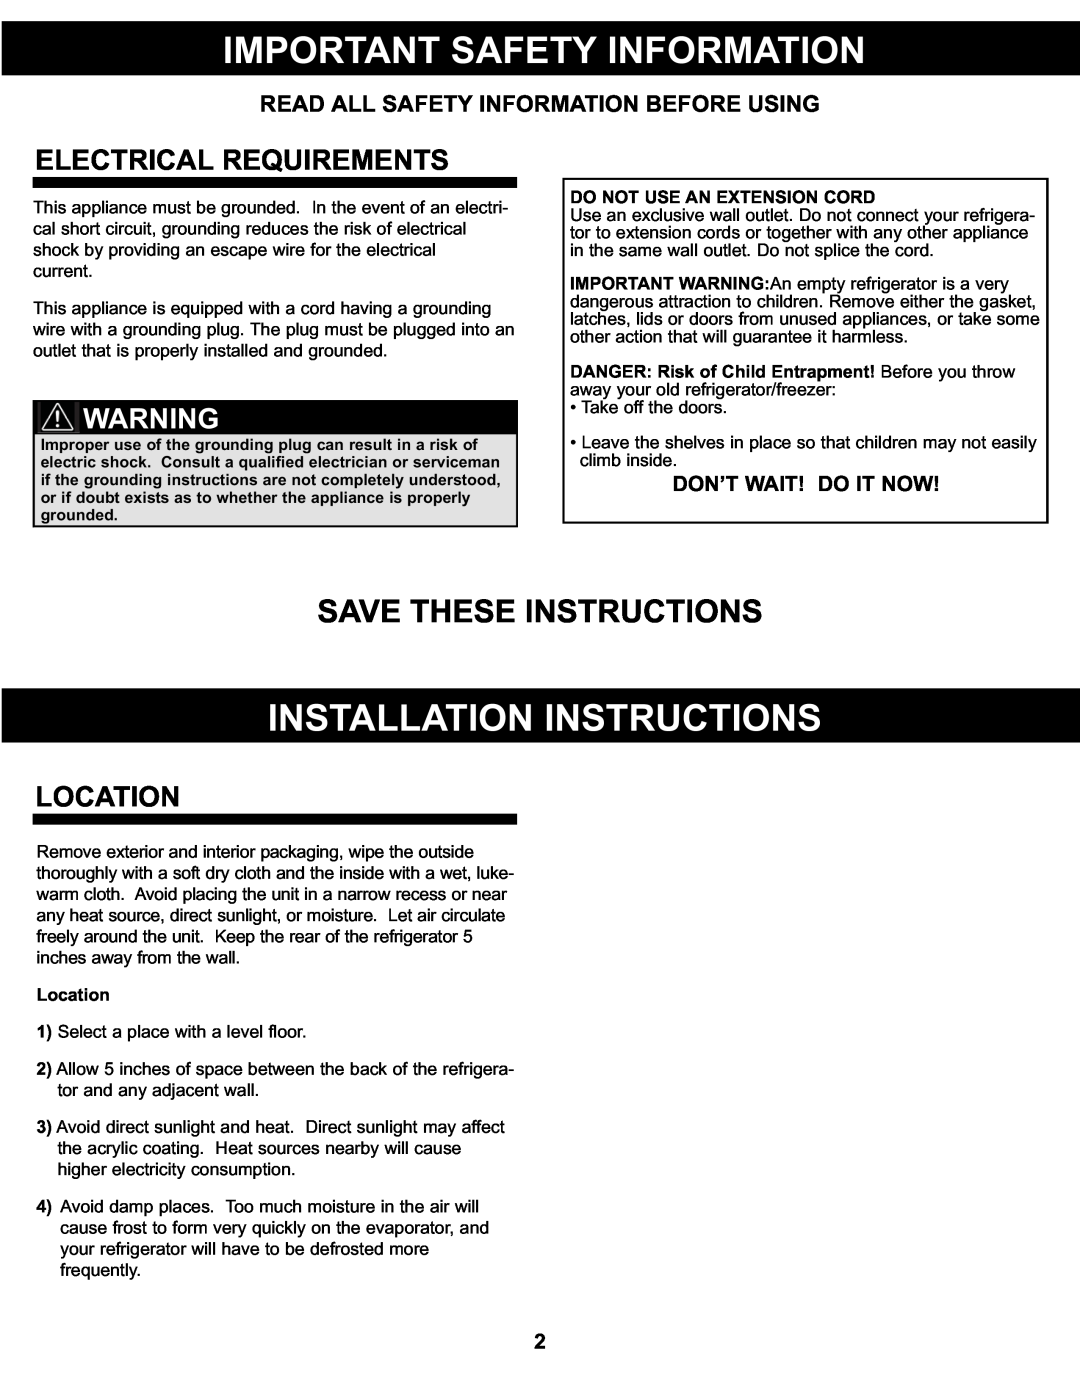 Sunbeam SBCR122BSL manual Important Safety Information, Installation Instructions, Save These Instructions, Location 